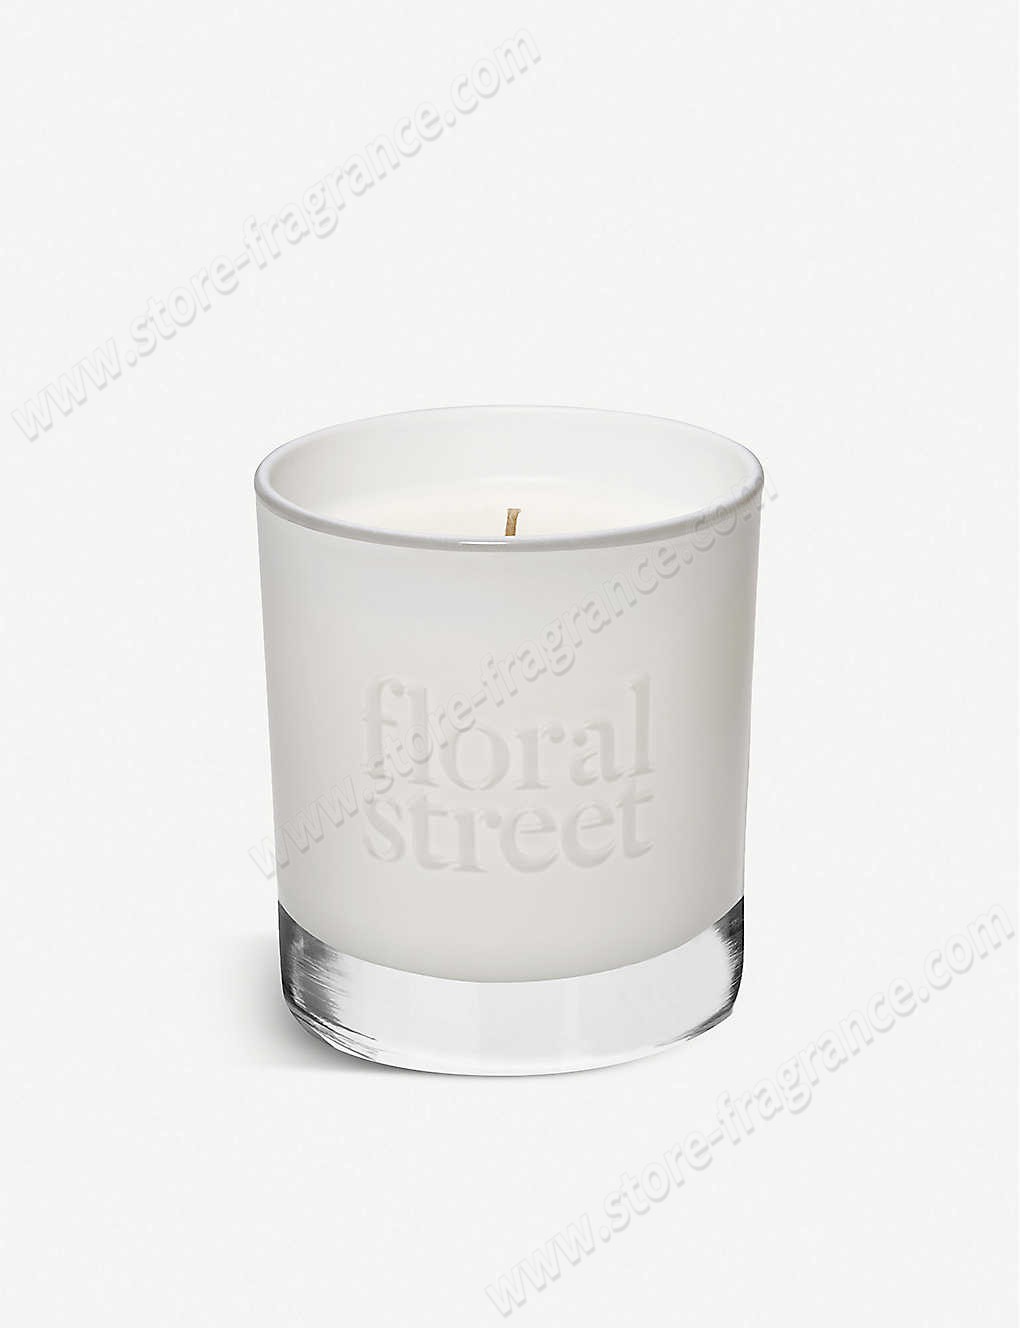 FLORAL STREET/White Rose scented candle 200g ✿ Discount Store - FLORAL STREET/White Rose scented candle 200g ✿ Discount Store